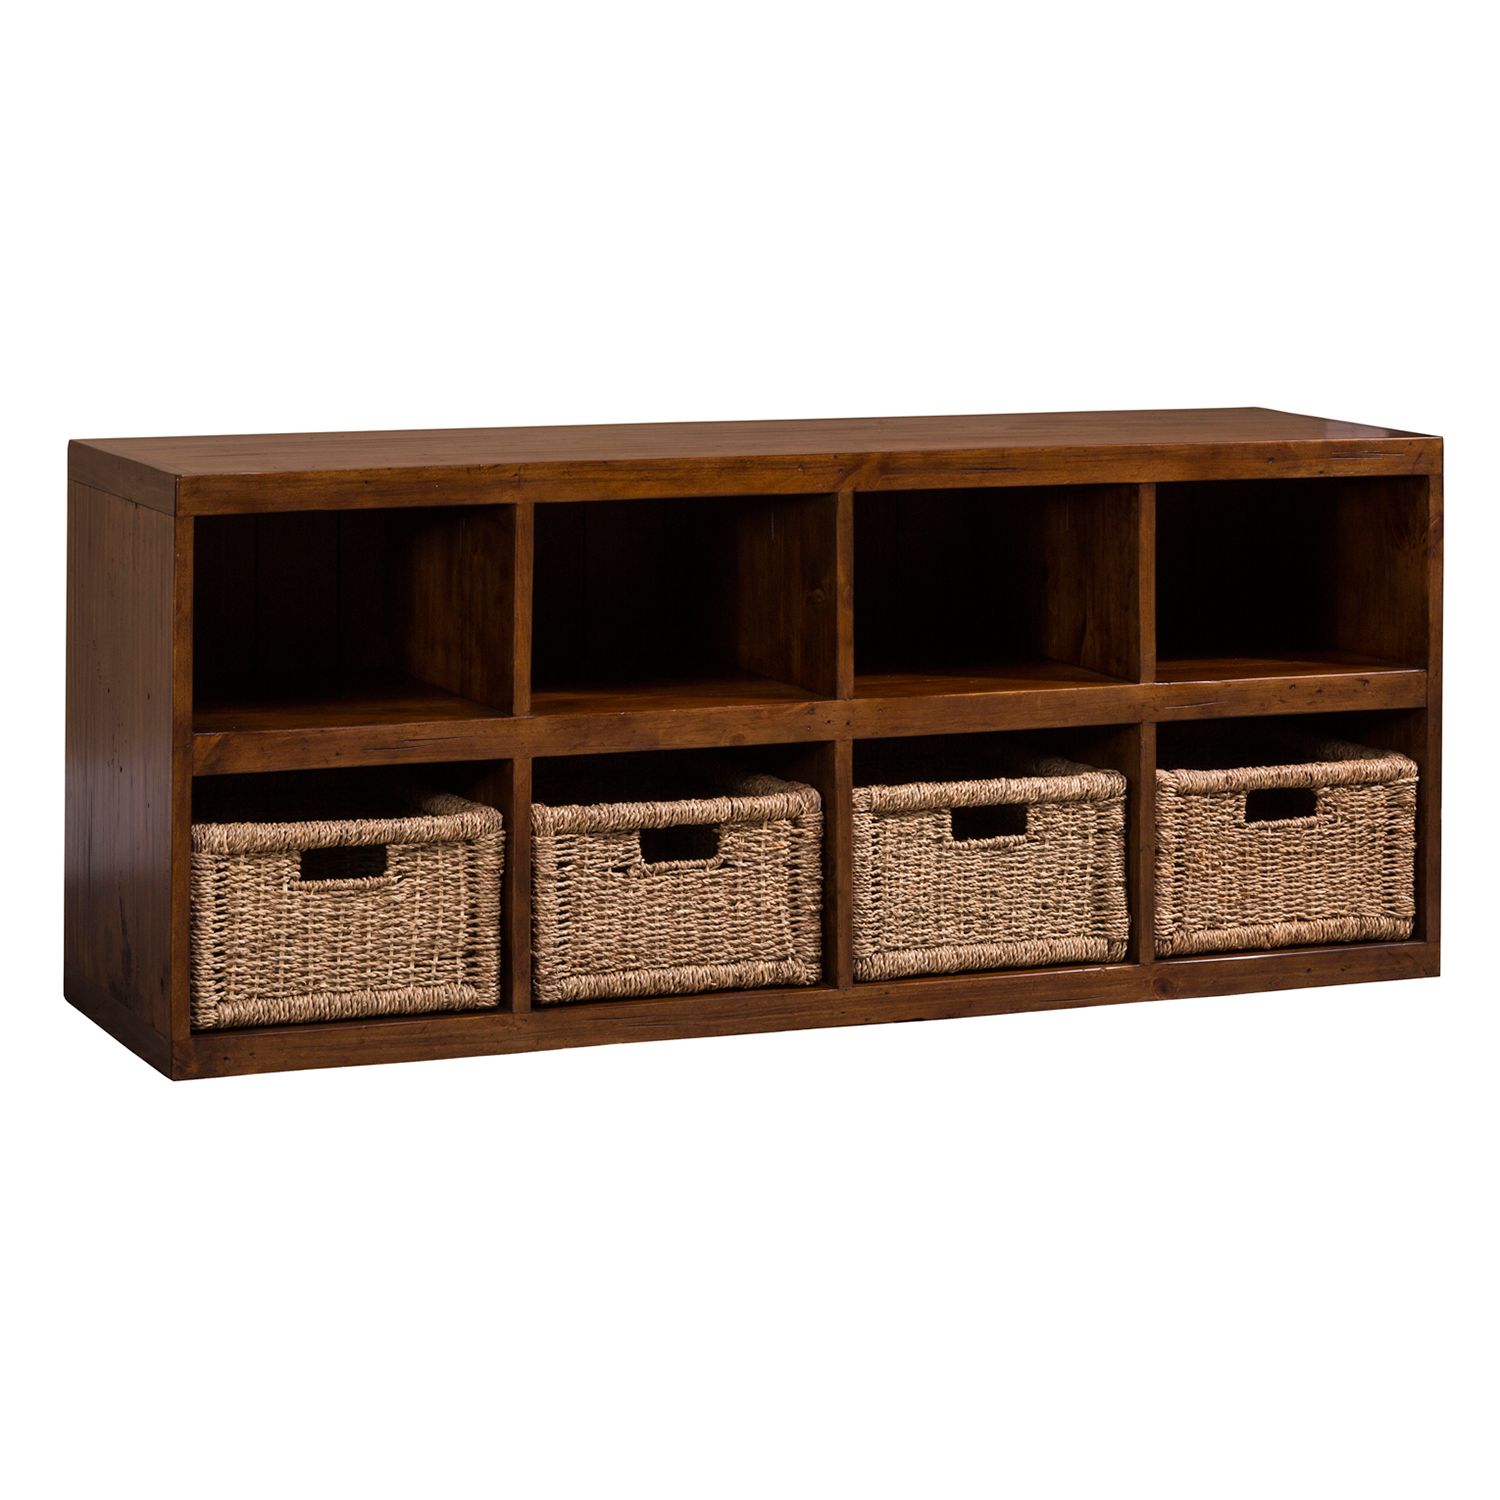 Image for Hillsdale Furniture Tuscan Retreat Storage Cabinet at Kohl's.